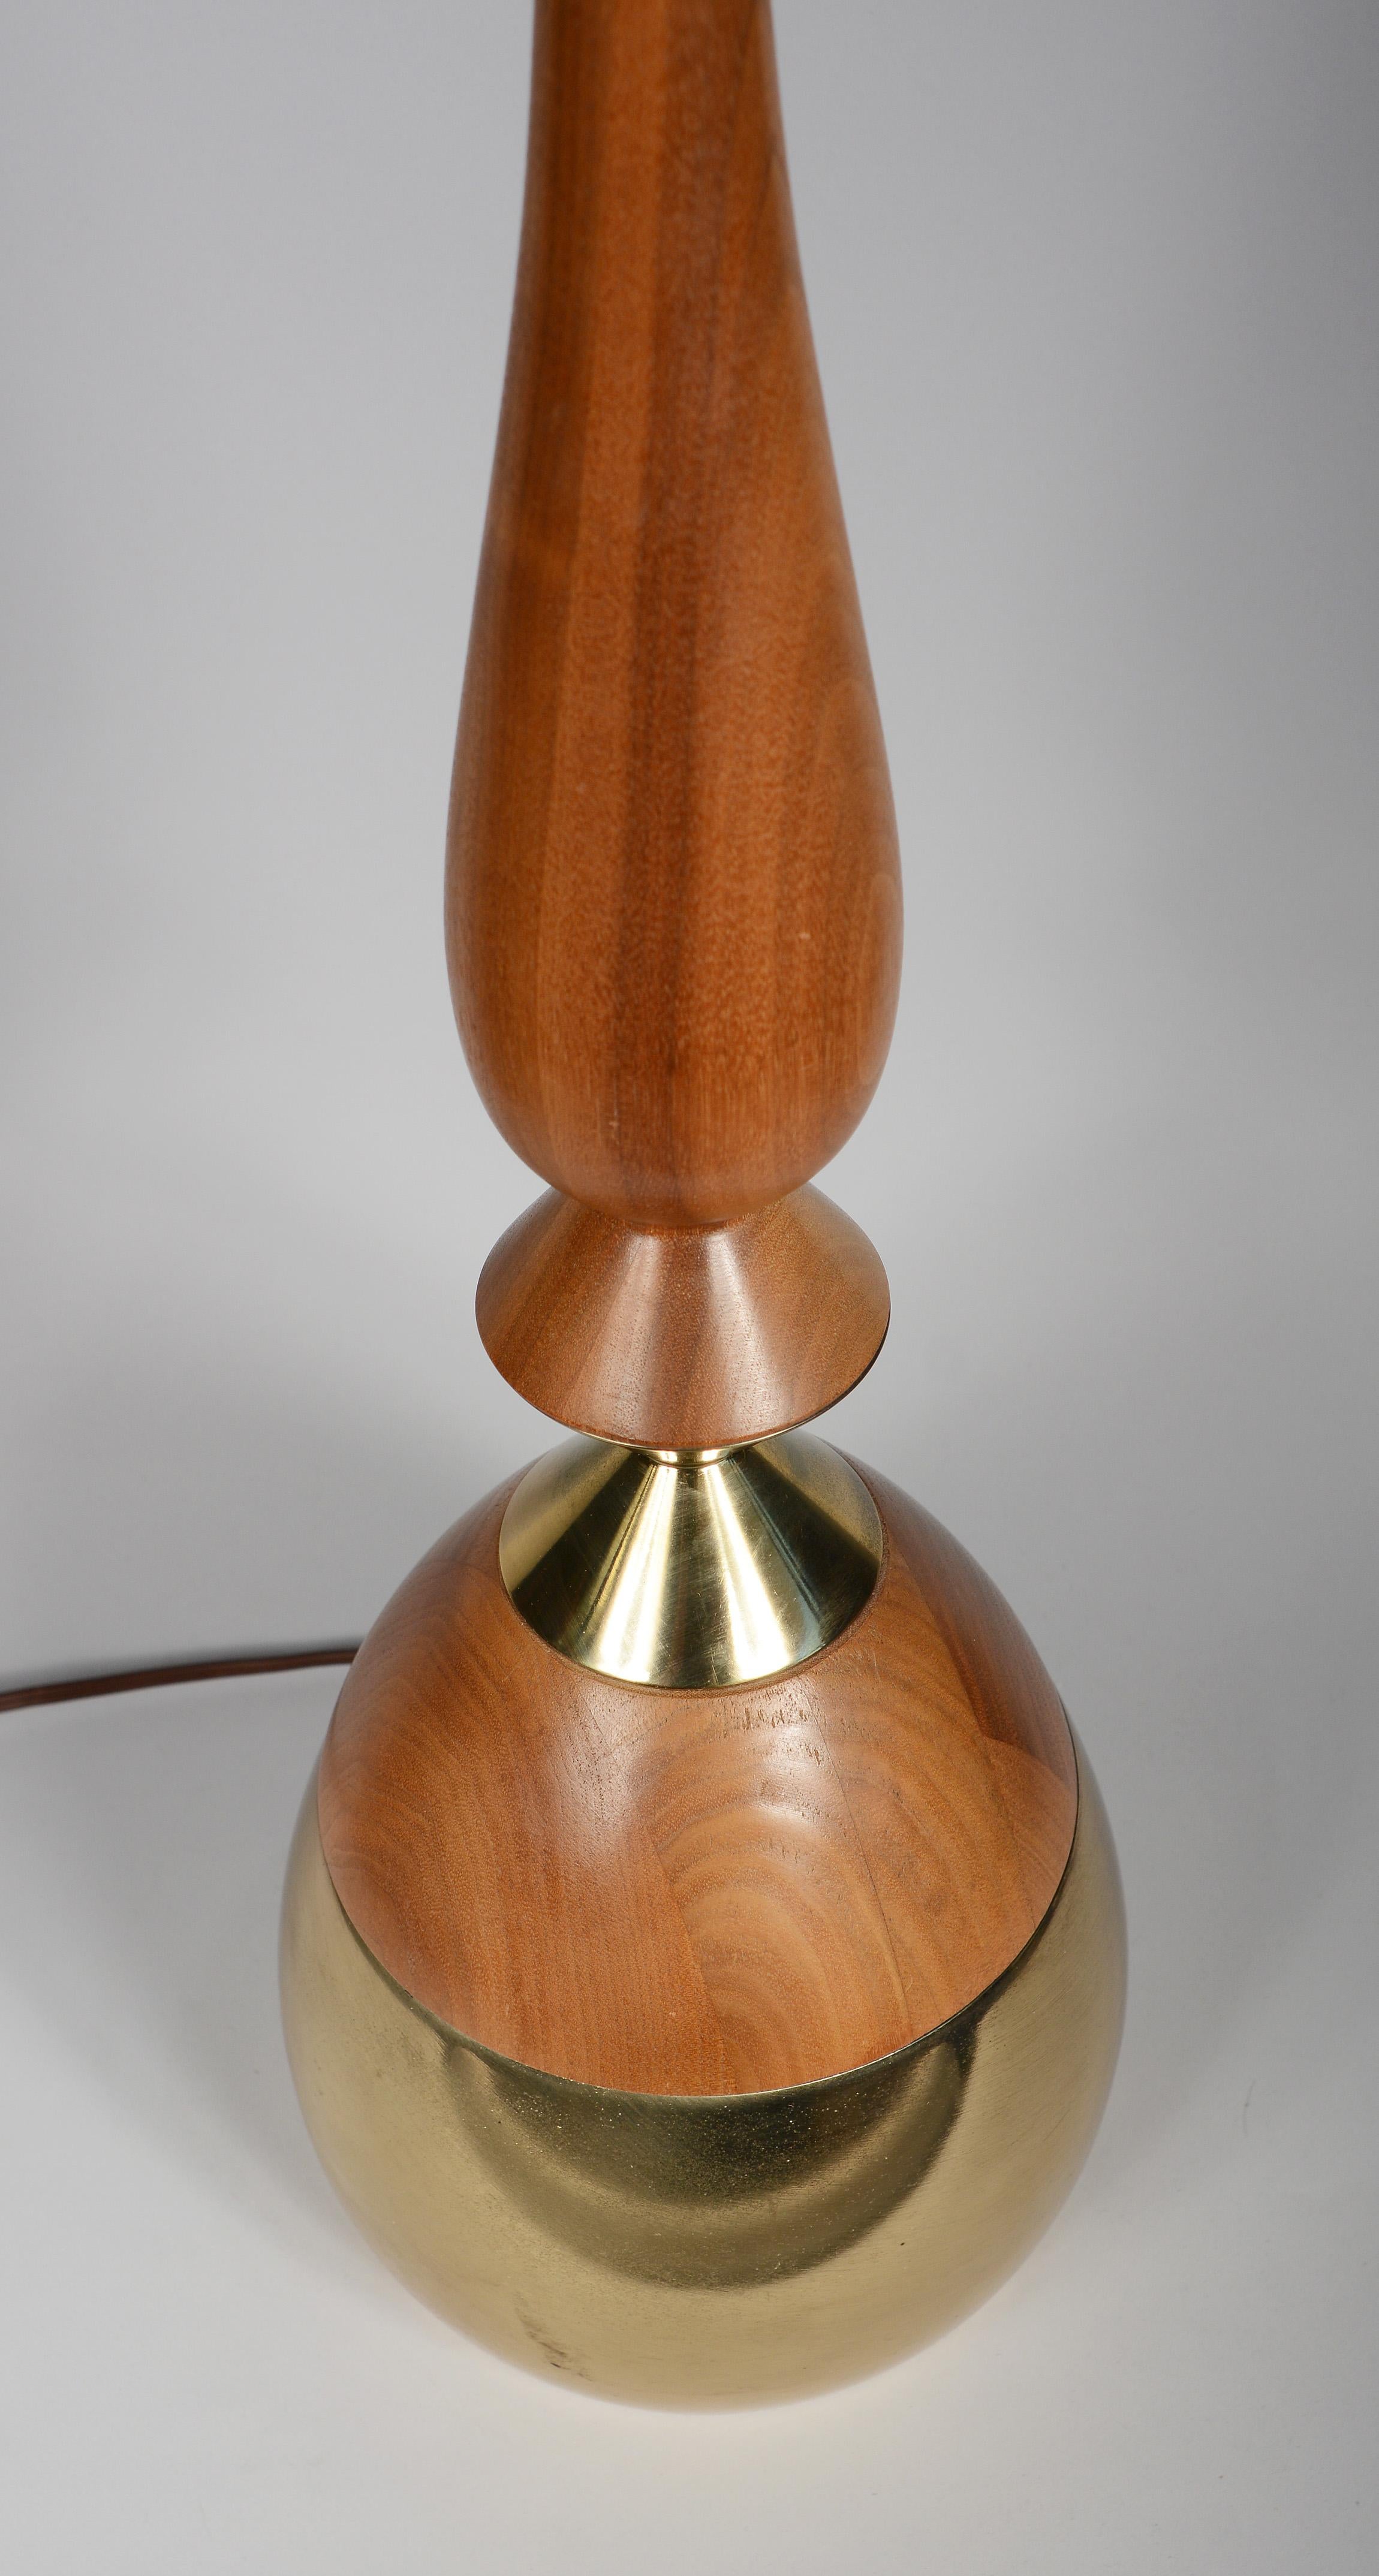 Tall walnut and brass table lamp designed by Tony Paul. This lamp has two turned walnut sections separated by an hourglass brass section atop a brass base. The lamp retains a portion of the Westwood label. The walnut is a little sun bleached with